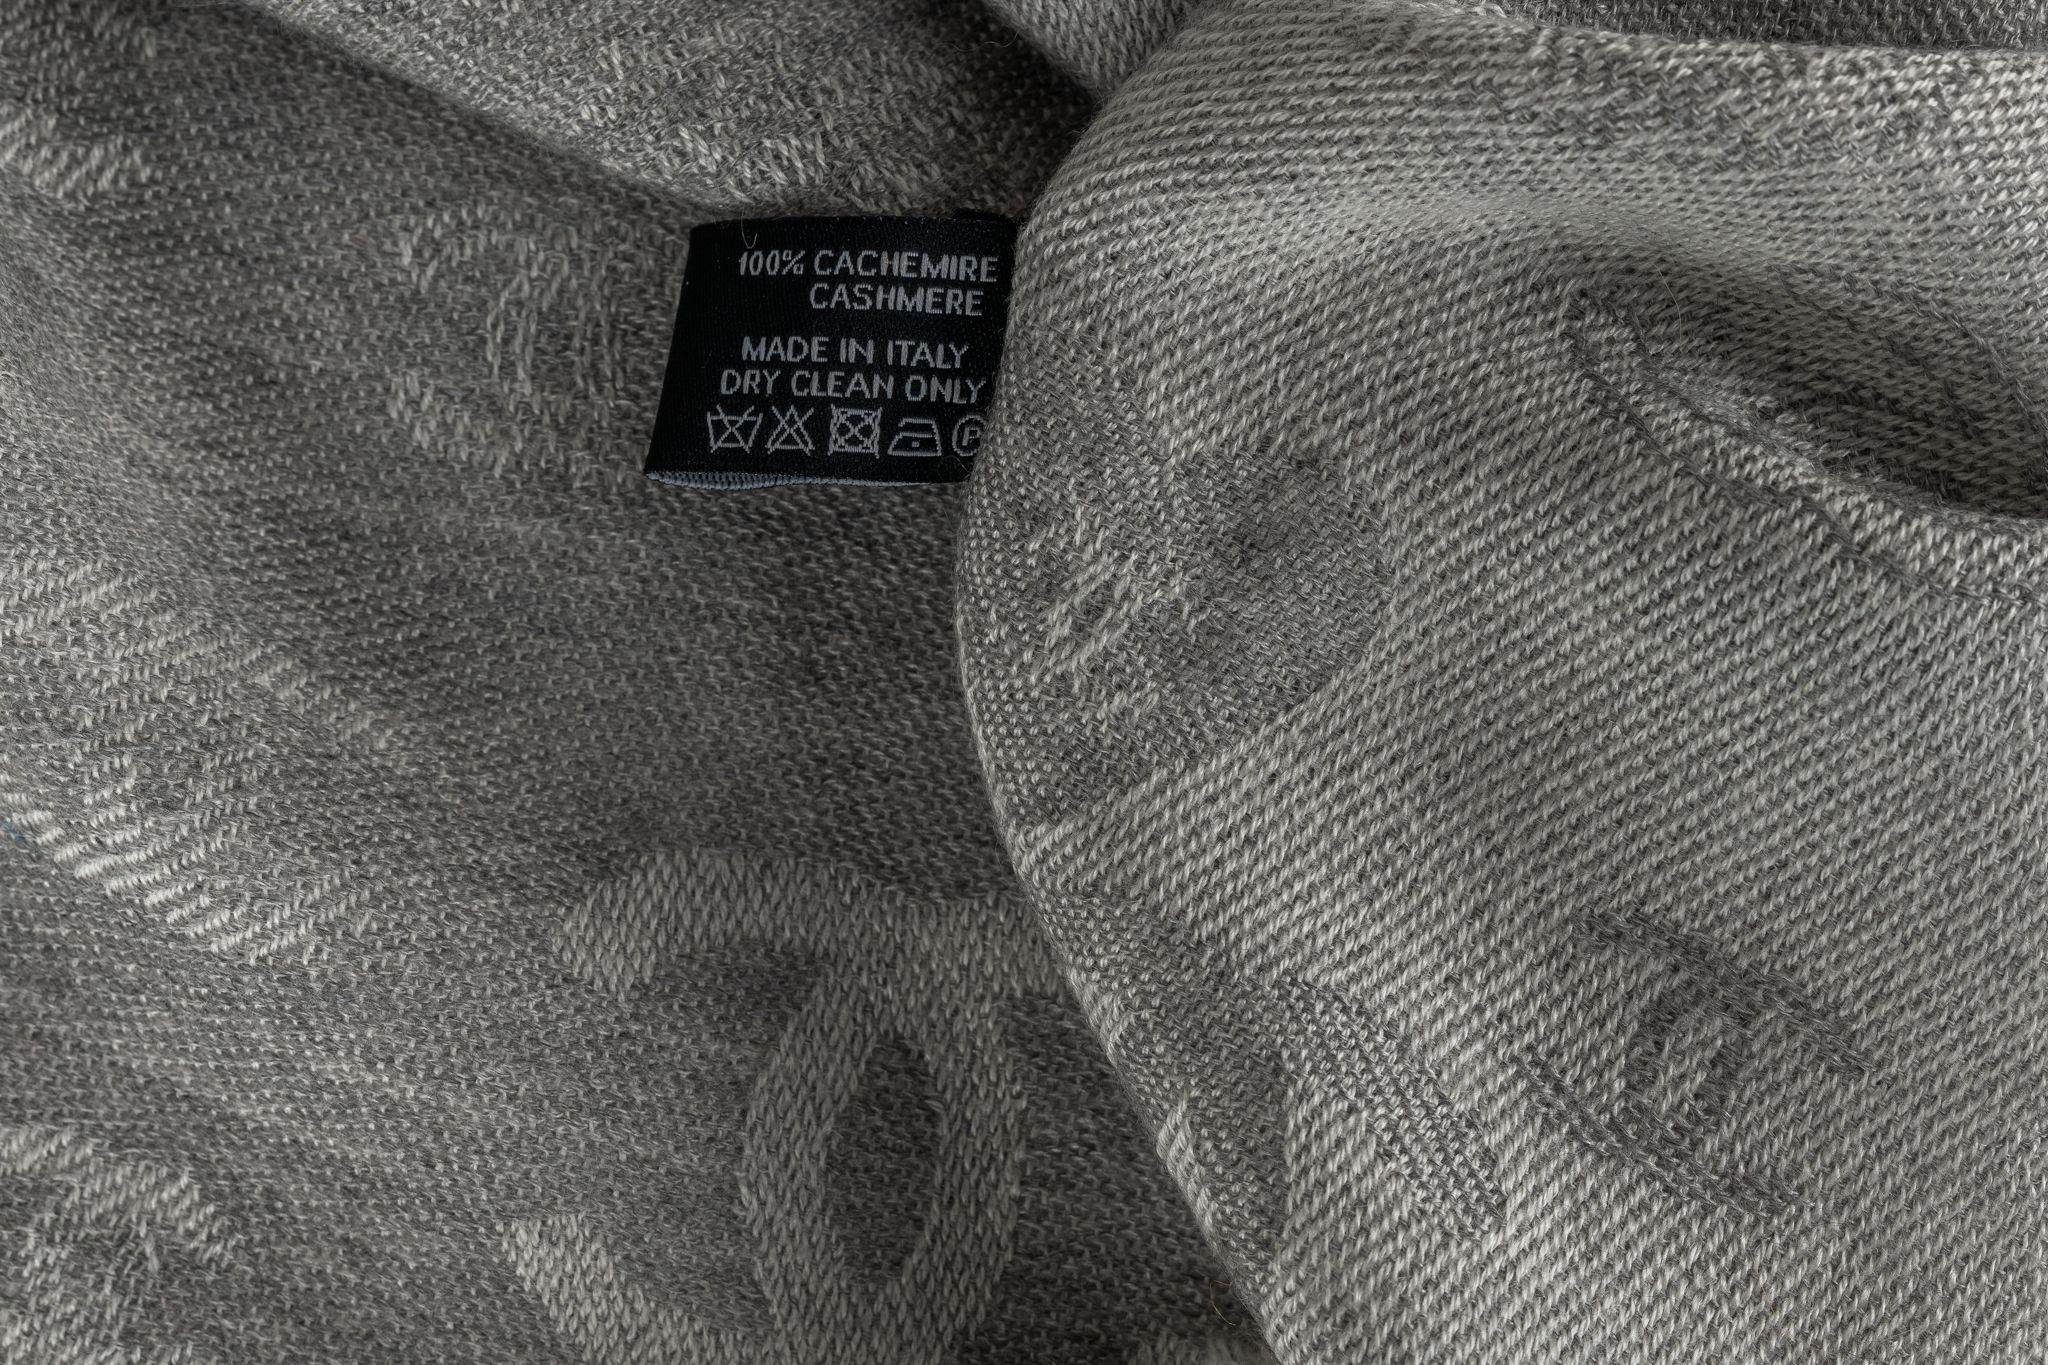 Chanel New Cashmere Shawl Grey In New Condition For Sale In West Hollywood, CA